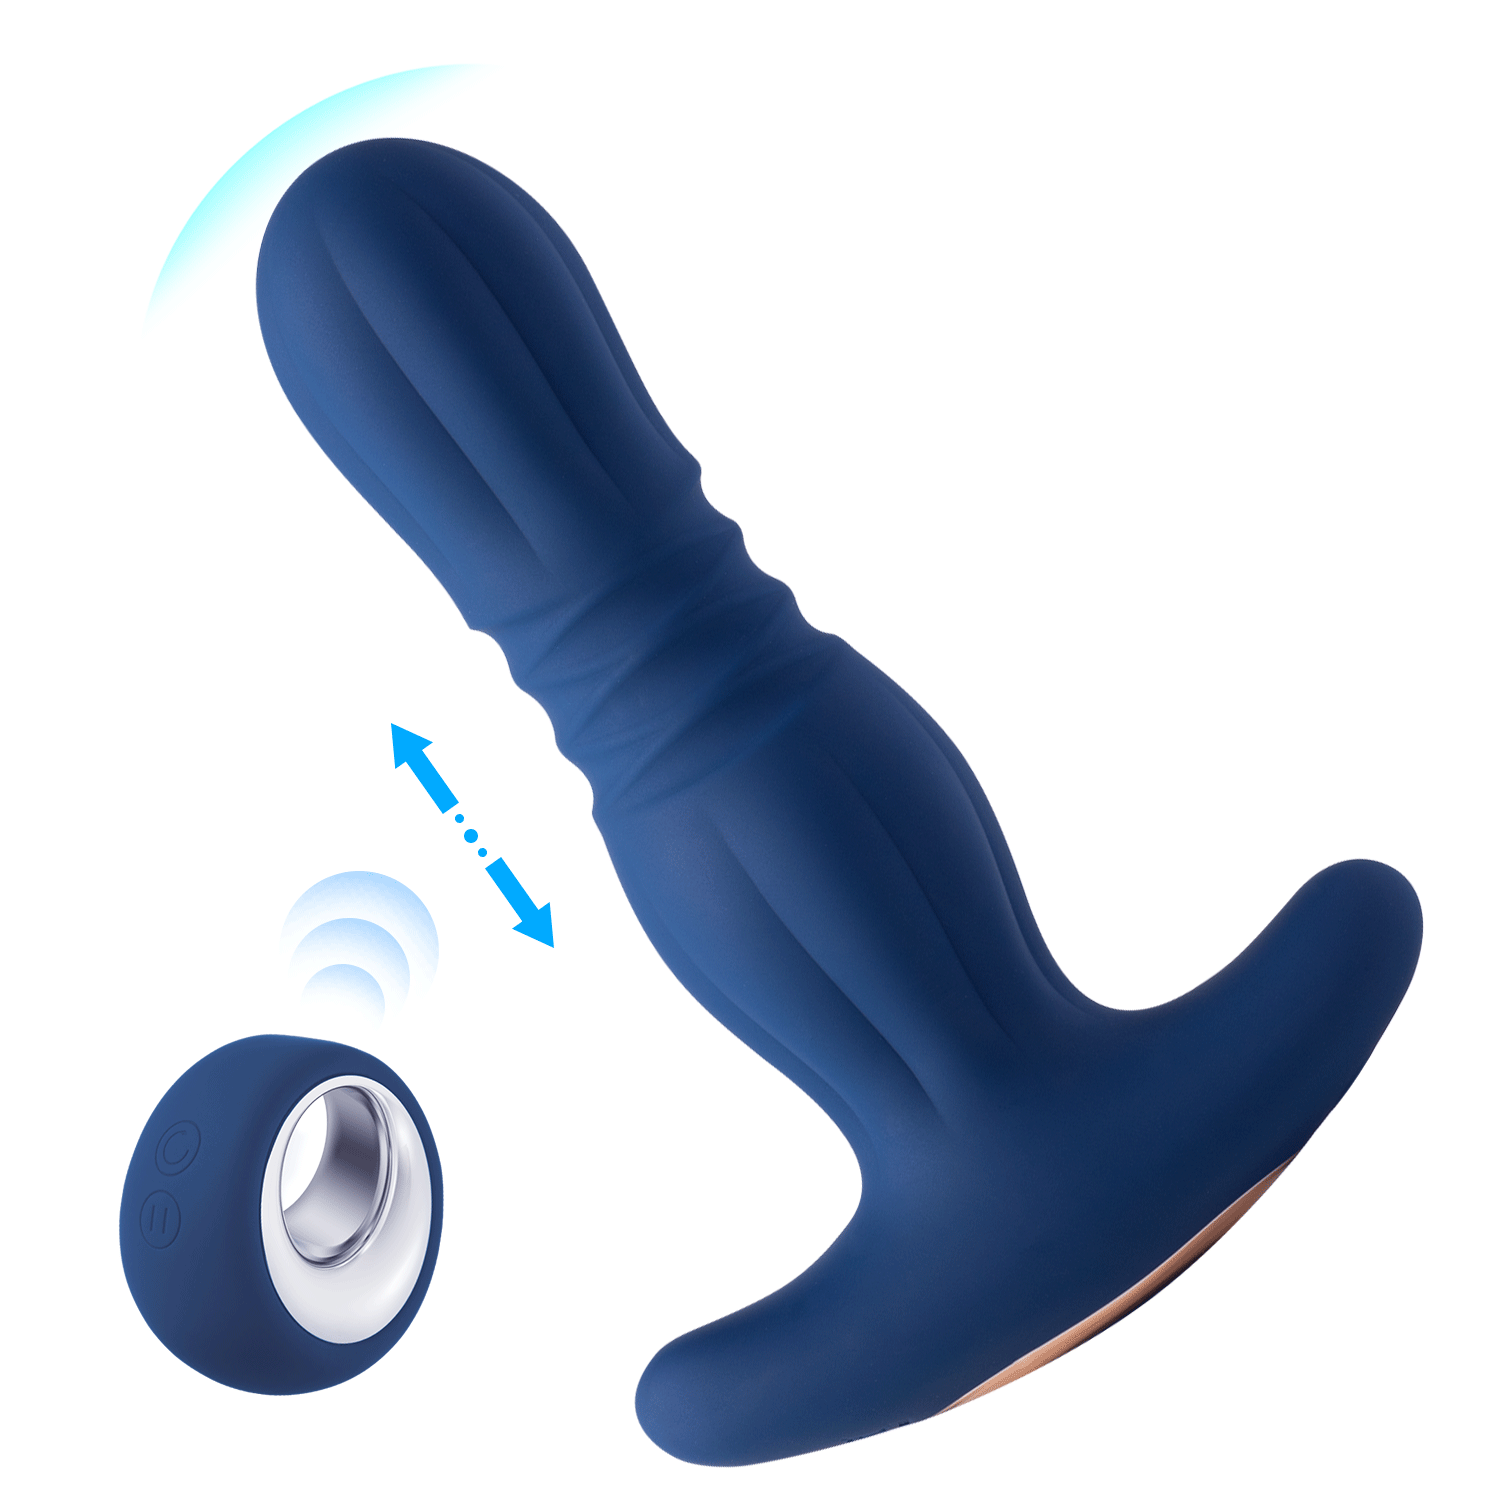 AGAS Thrusting Butt Plug with Remote Control - Thorn & Feather